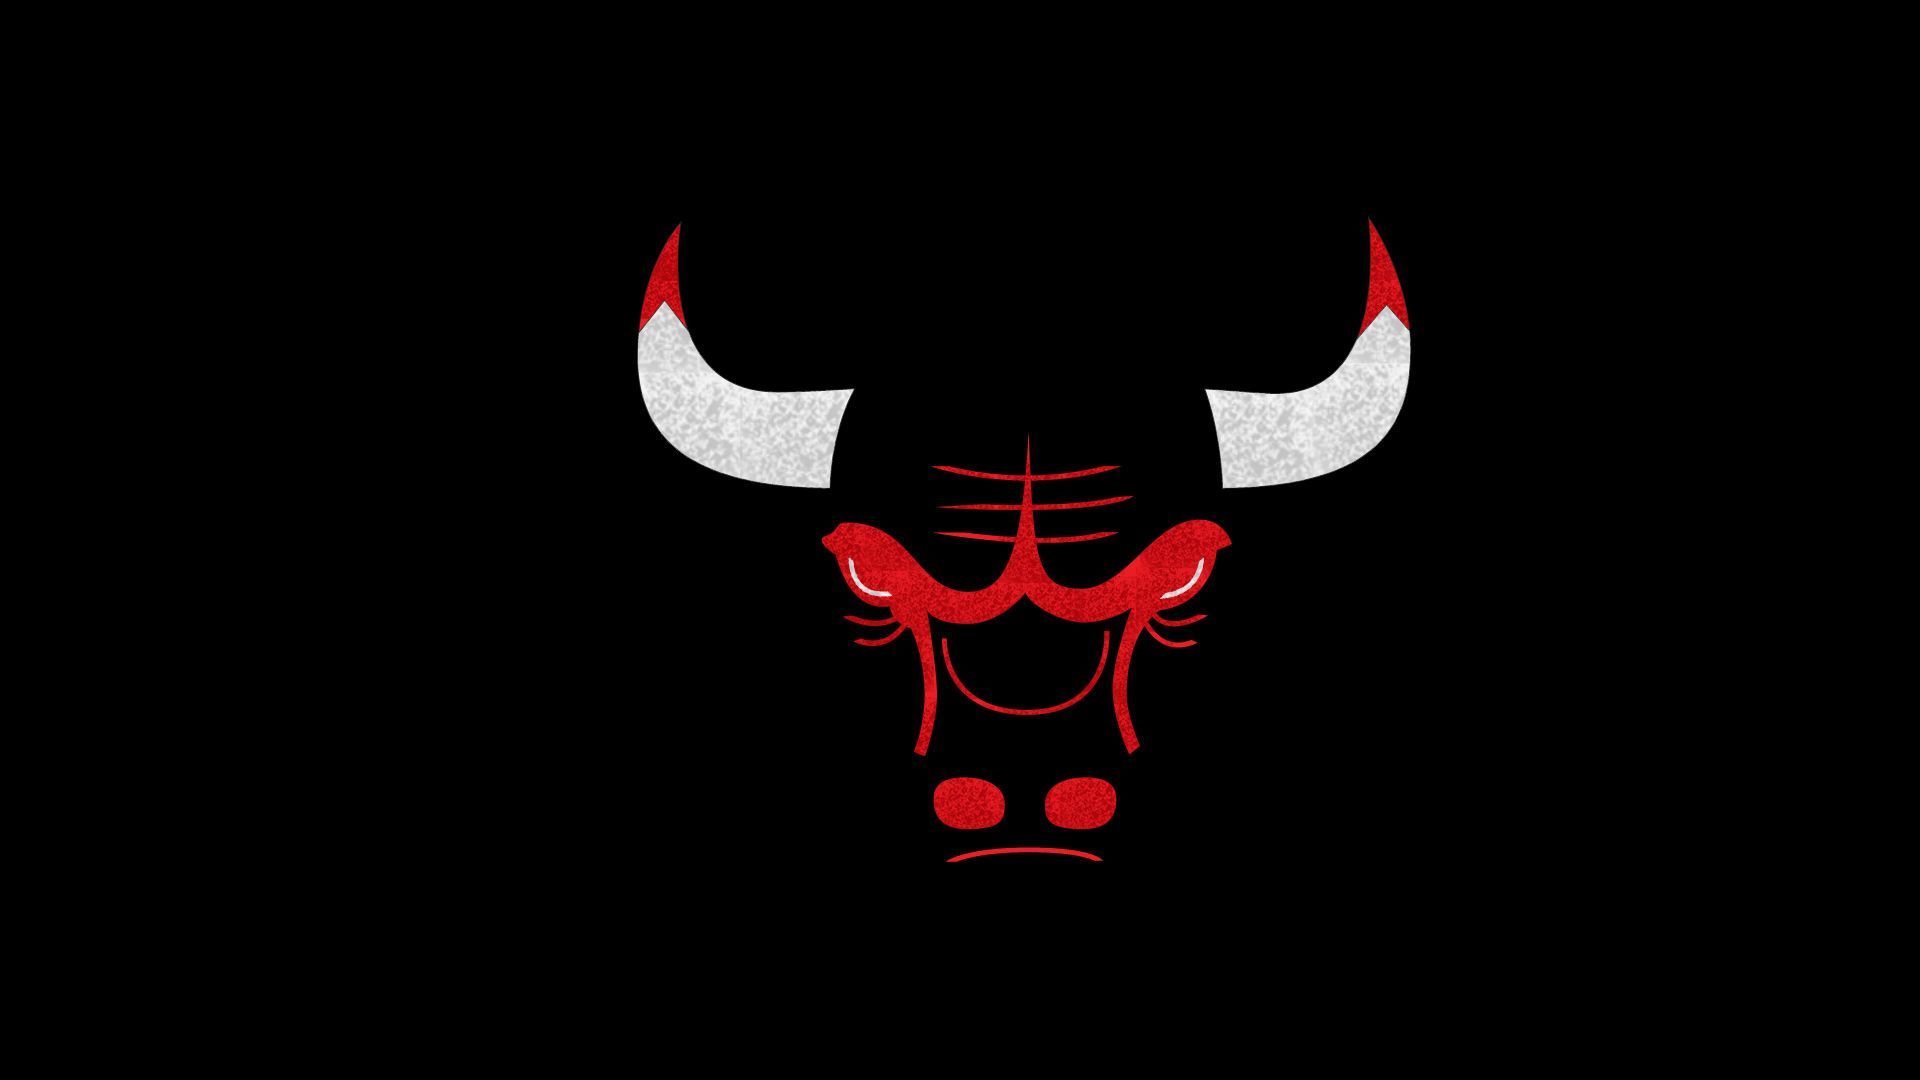 Download free chicago bulls wallpapers for your mobile phone by